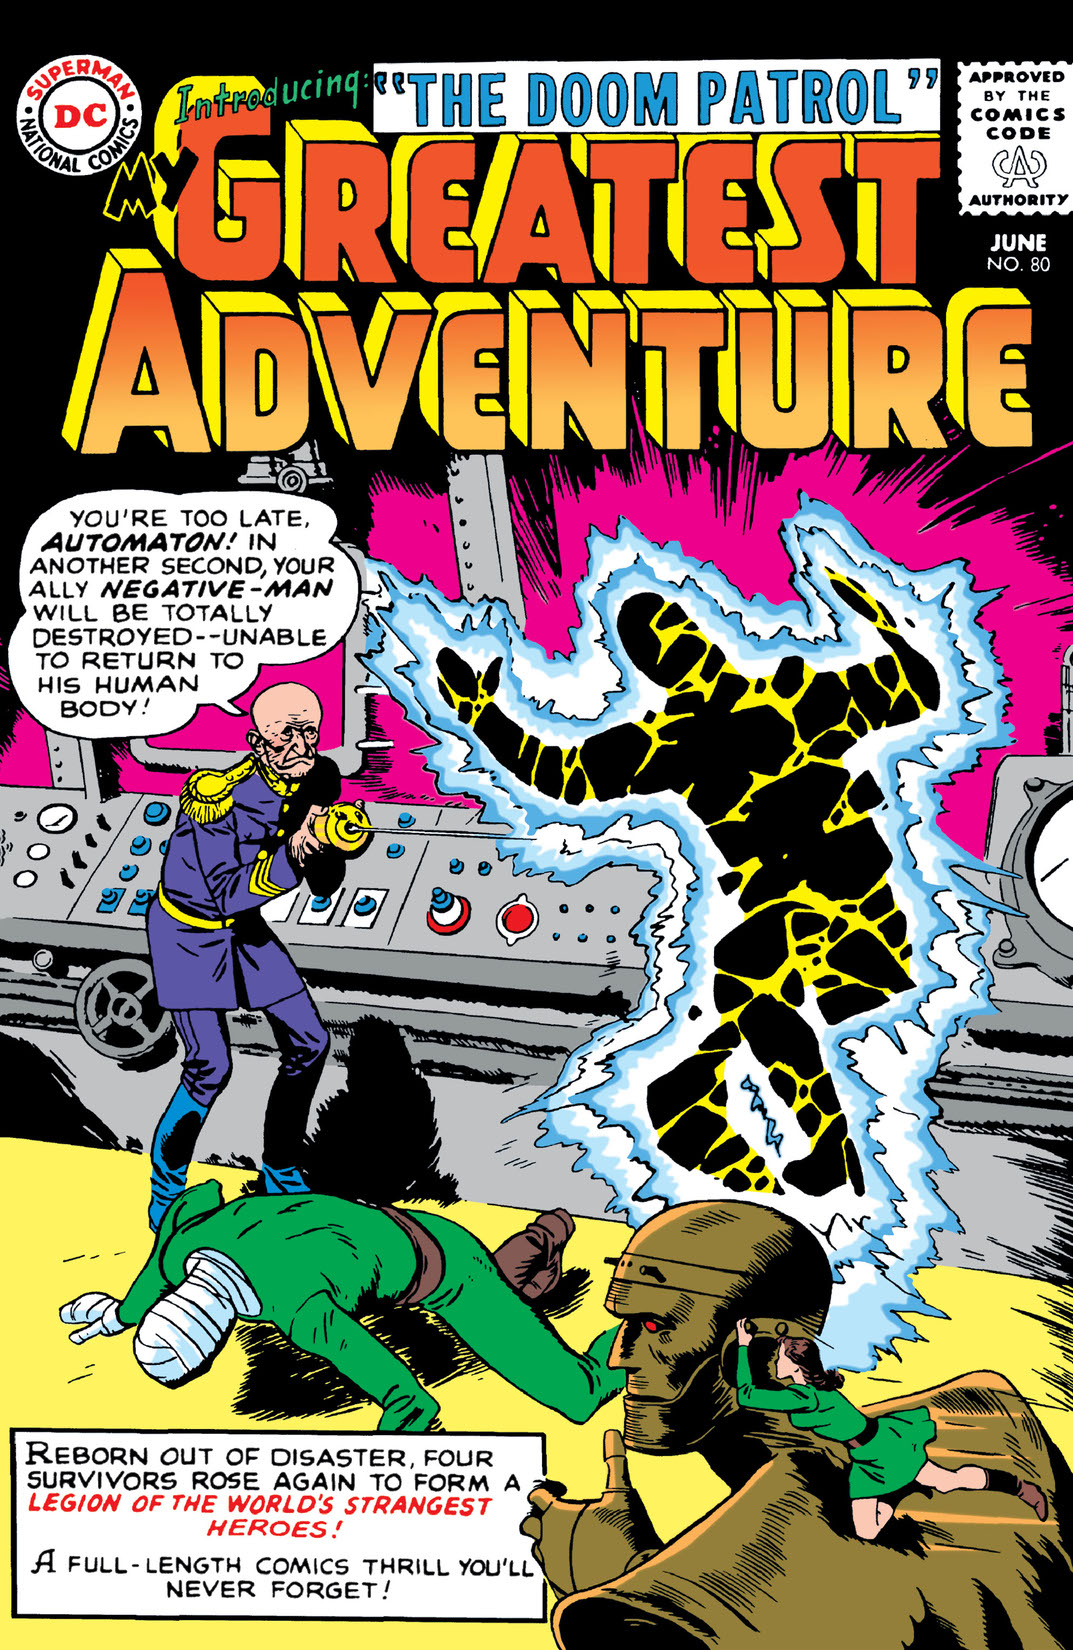 My Greatest Adventure (1955-) #80 preview images